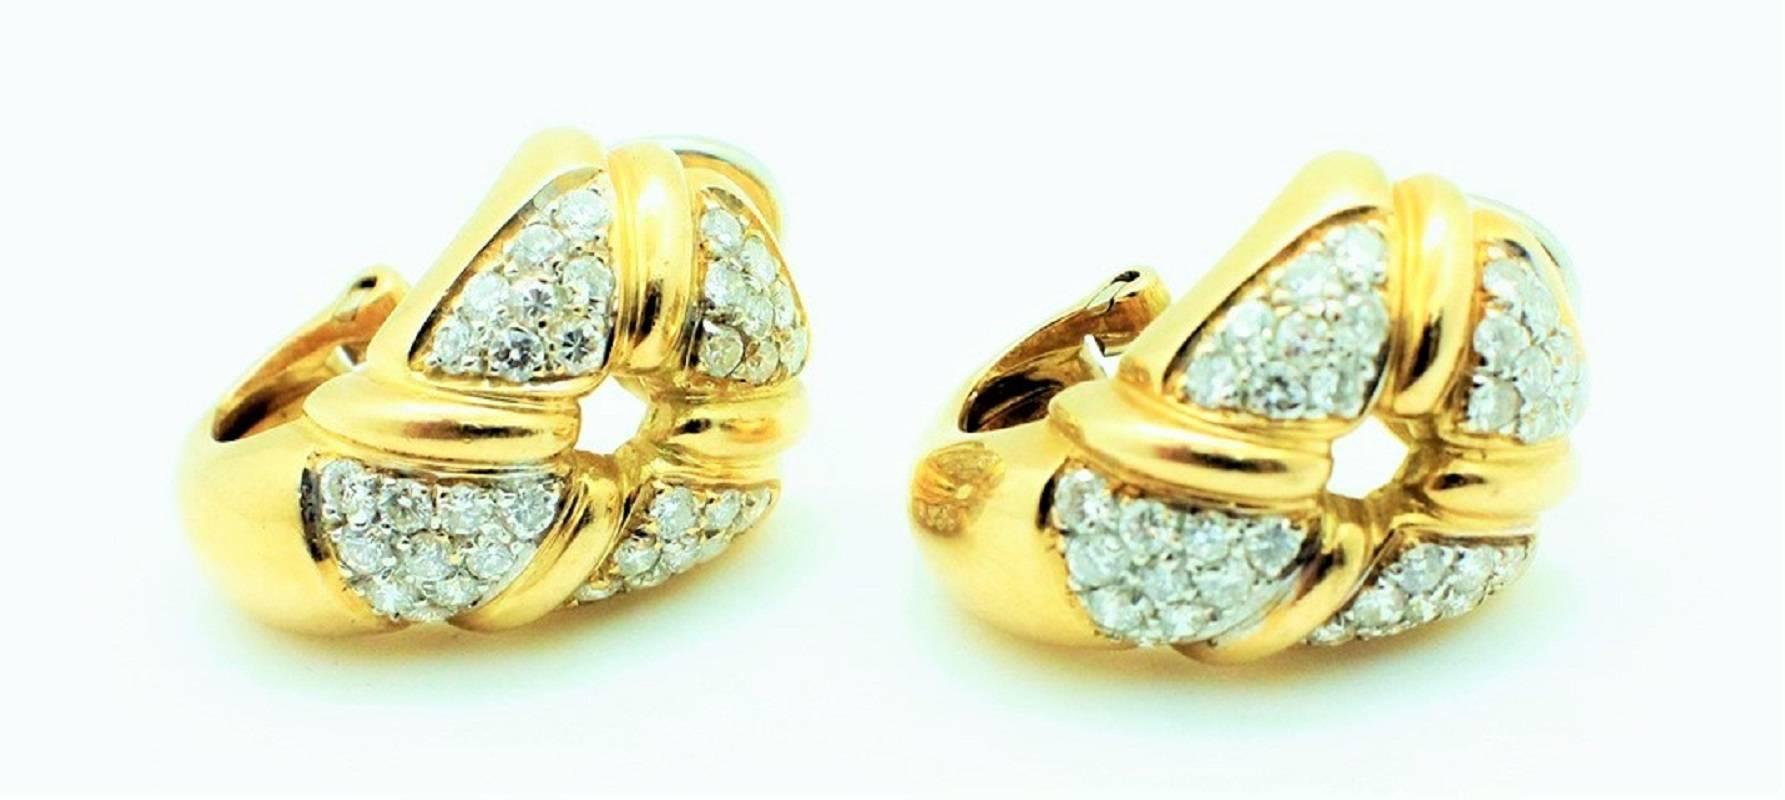 These spectacular signed Chaumet Paris Clip On Earrings feature 1.50 carats of VS clarity G color white round brilliant cut diamonds set in a gorgeous 18kt yellow gold. The earrings are highly desirable and contain the vintage French Hallmarks on